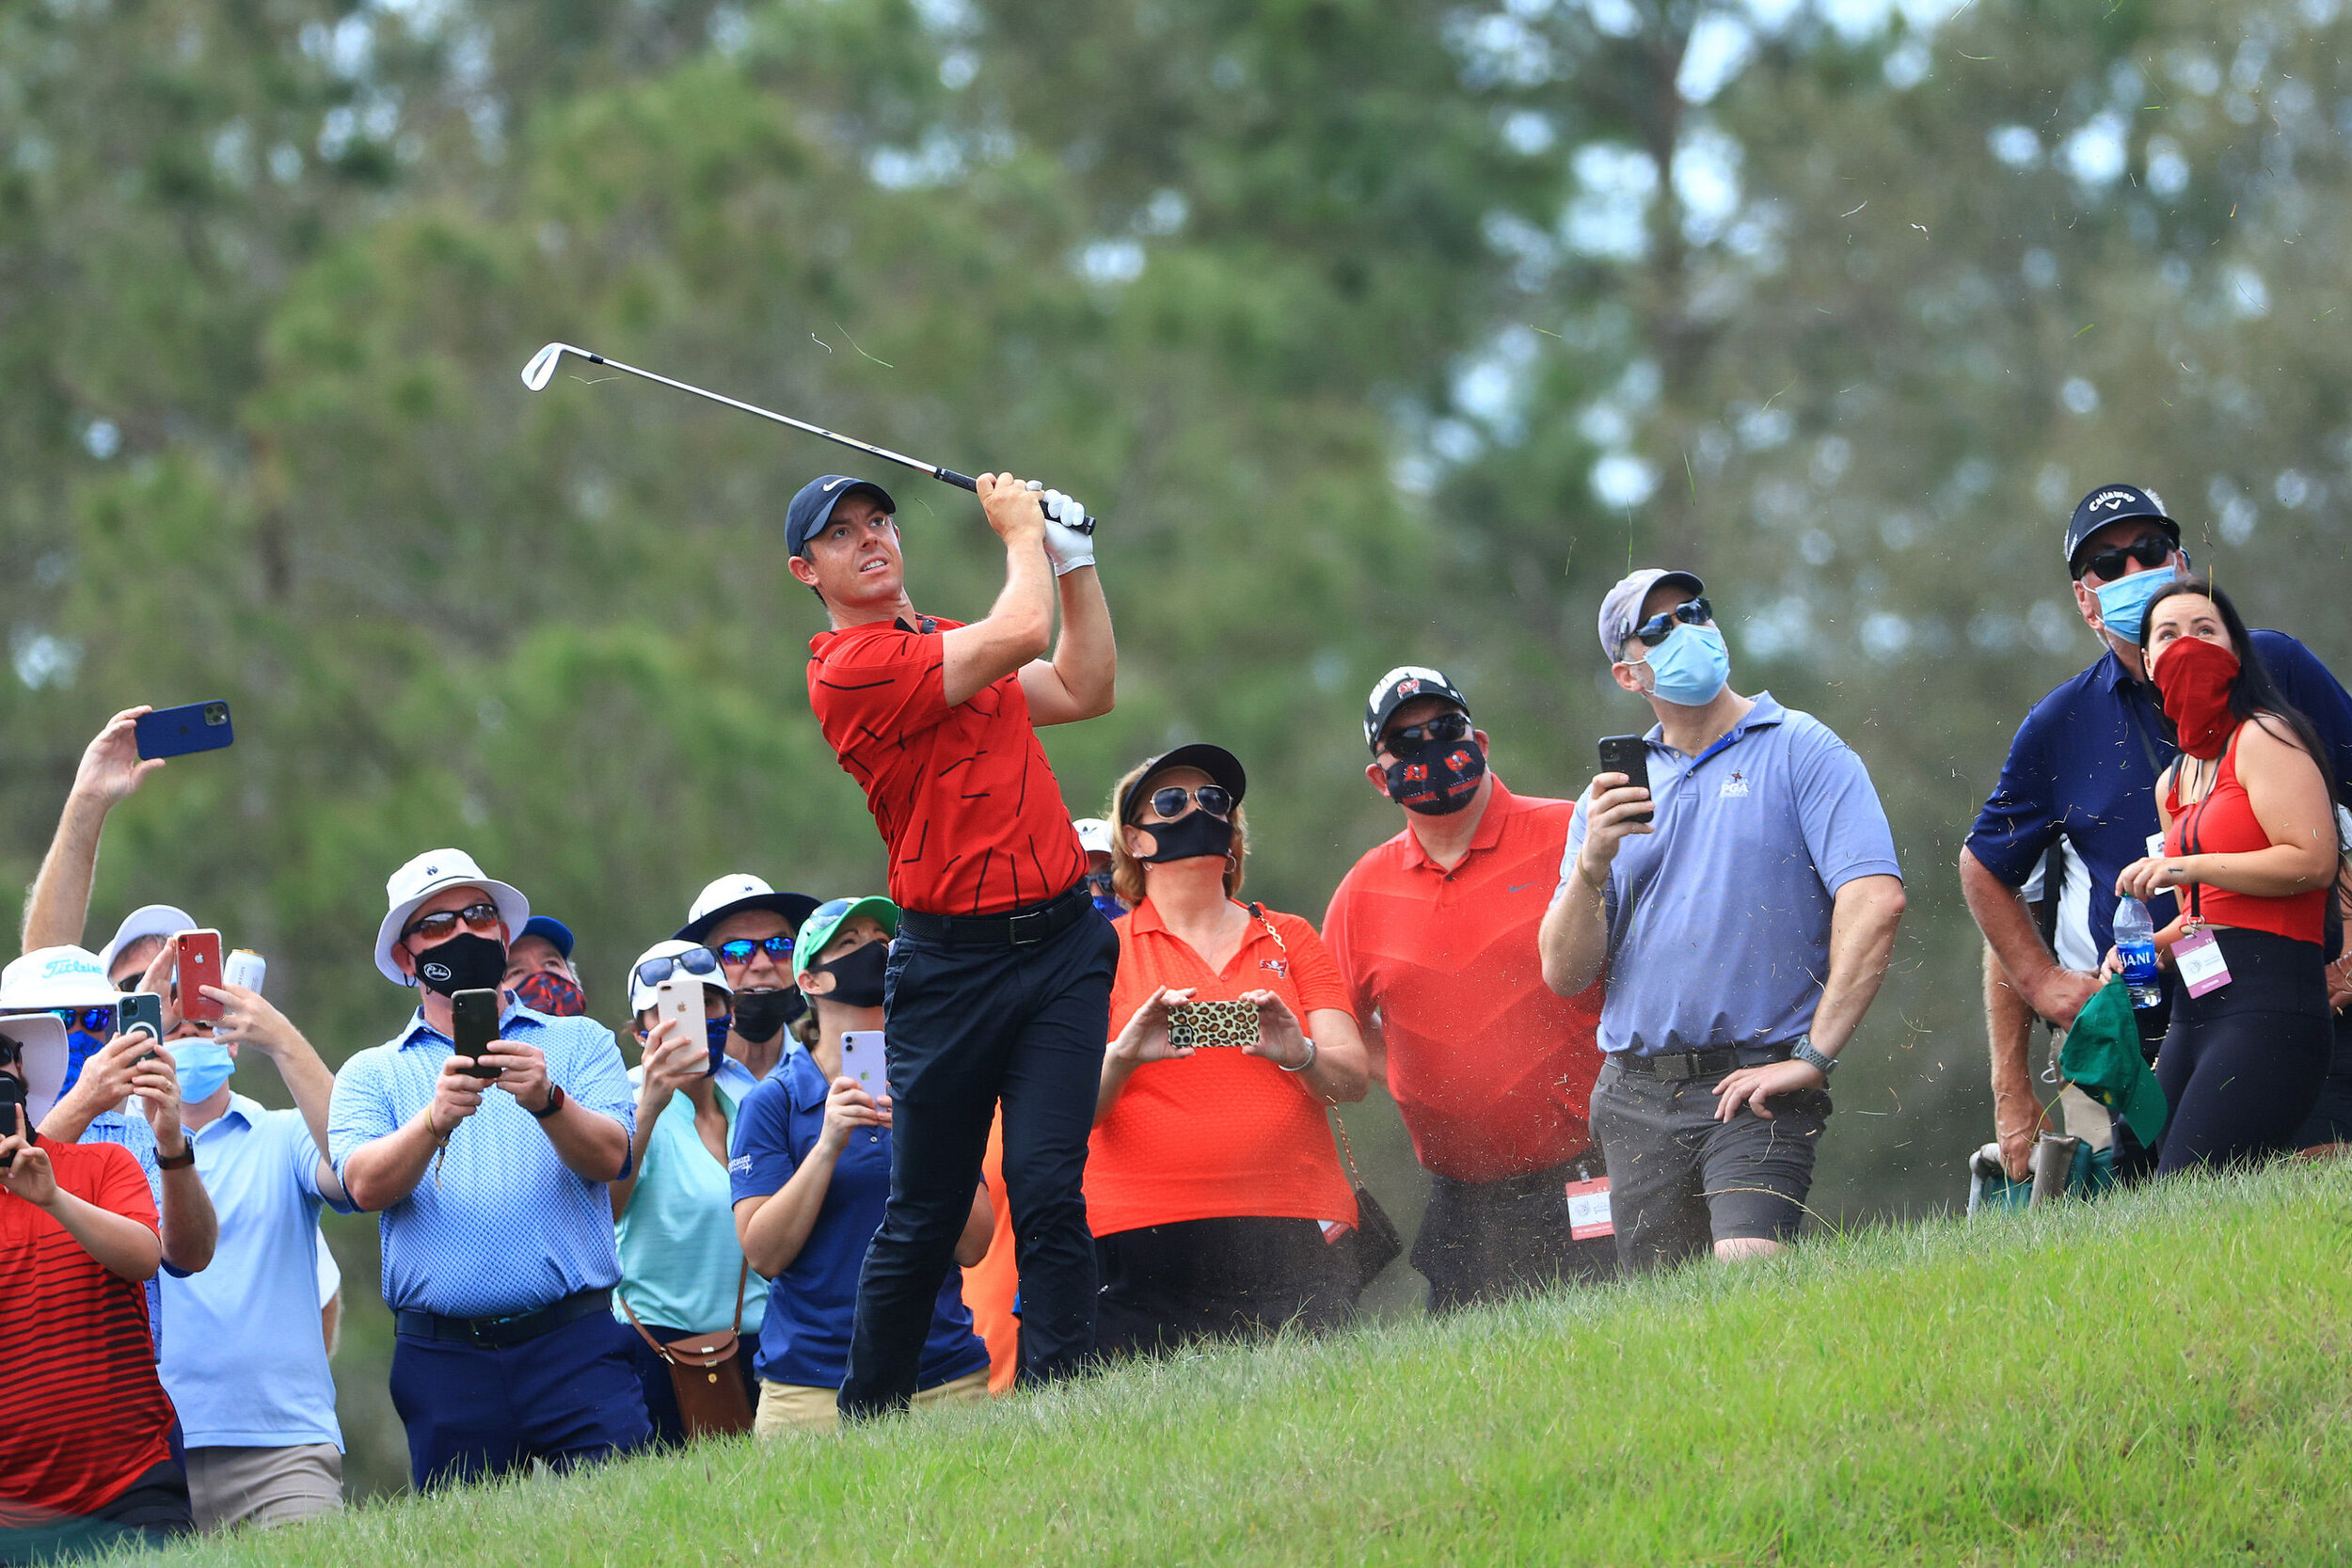  BRADENTON, FLORIDA - FEBRUARY 28: Fans watch as Rory McIlroy of Northern Ireland hits an approach shot on the seventh hole during the final round of World Golf Championships-Workday Championship at The Concession on February 28, 2021 in Bradenton, F